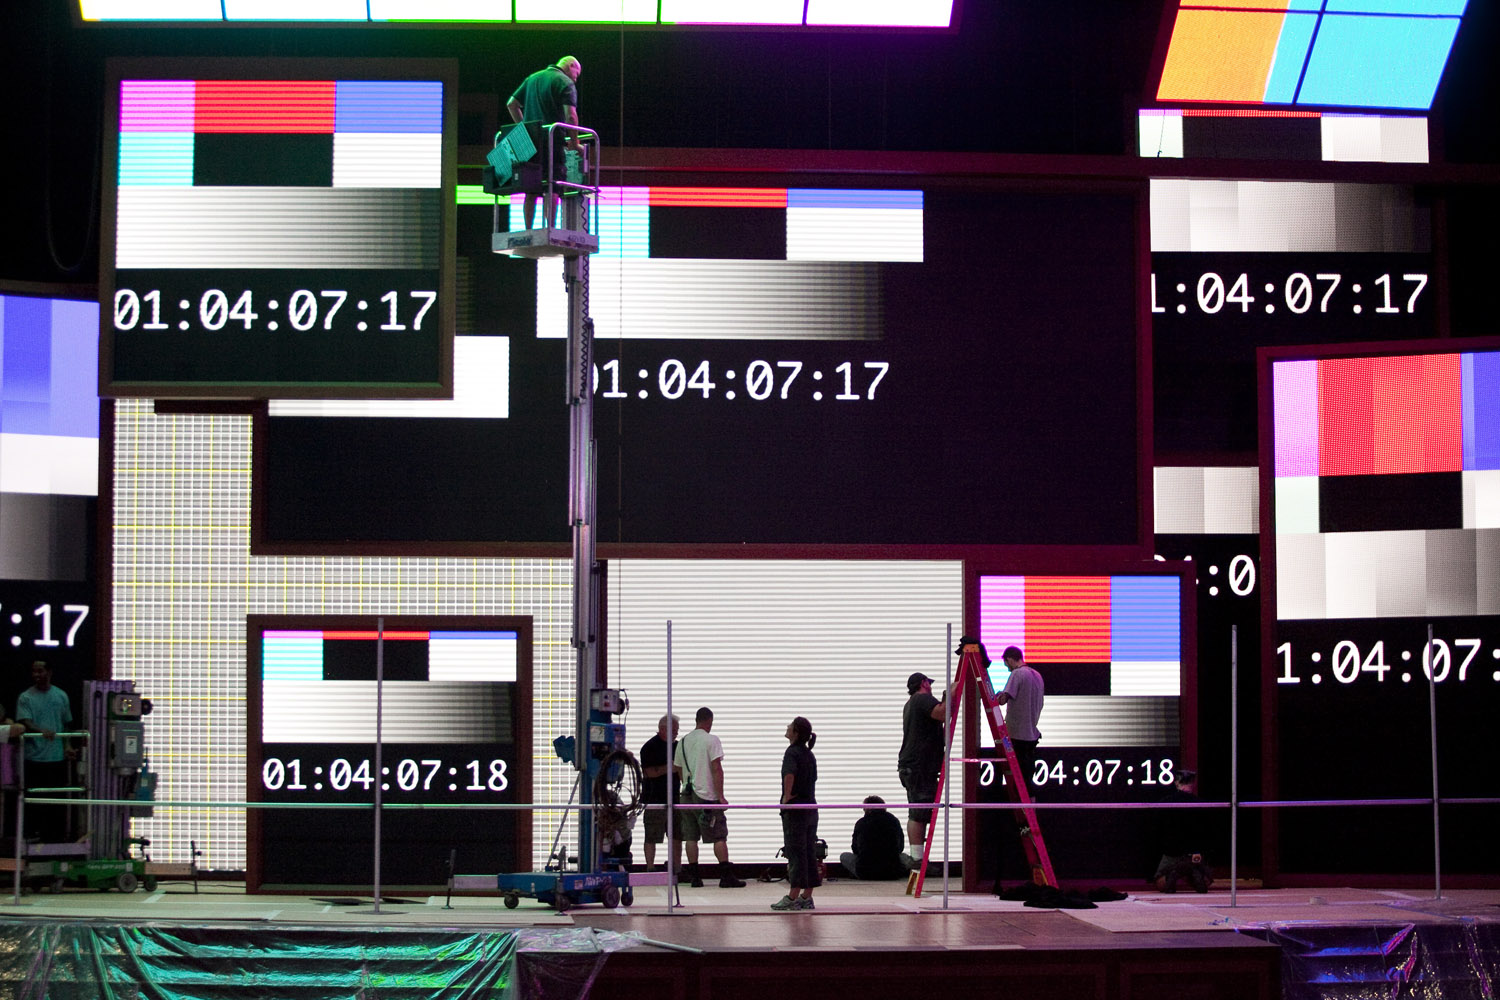 Aug. 13, 2012. Workers finish construction on display screens on stage at the Republican National Convention at the Tampa Bay Times Forum in Tampa, Fla.